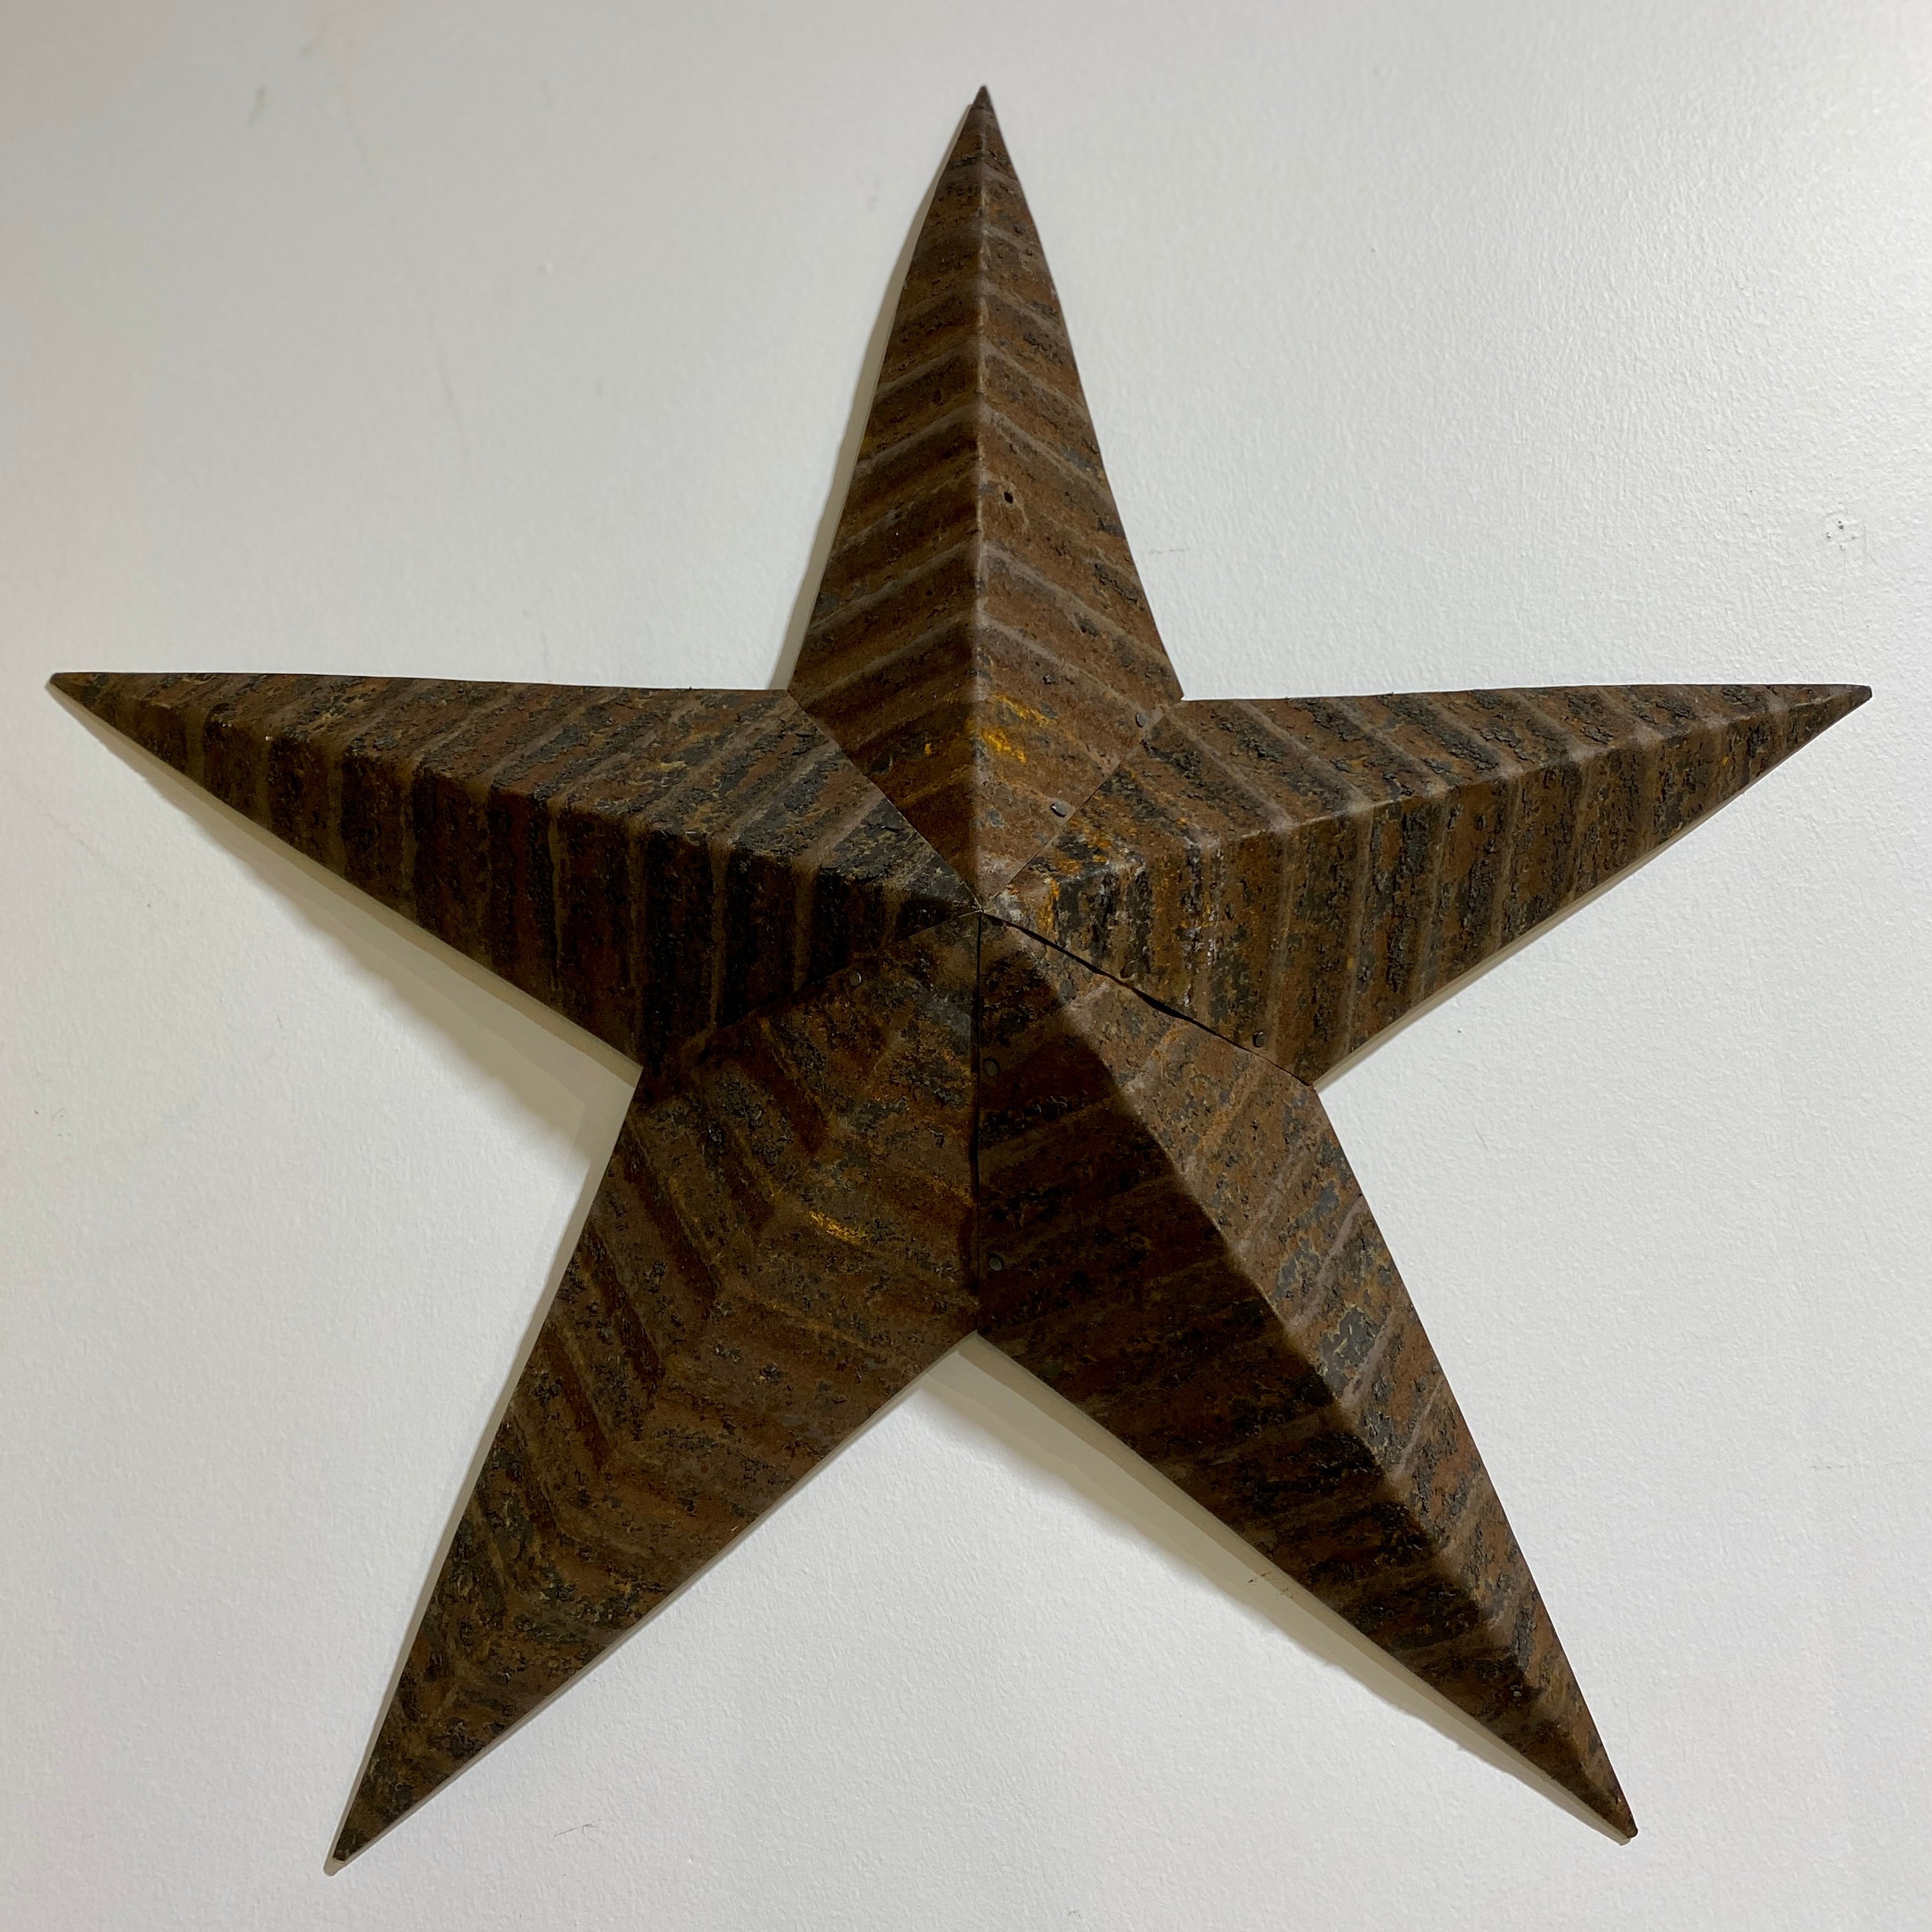 Authentic Amish Barn Star - GIANT 105 CM DIAMETER - RUSTED IRON